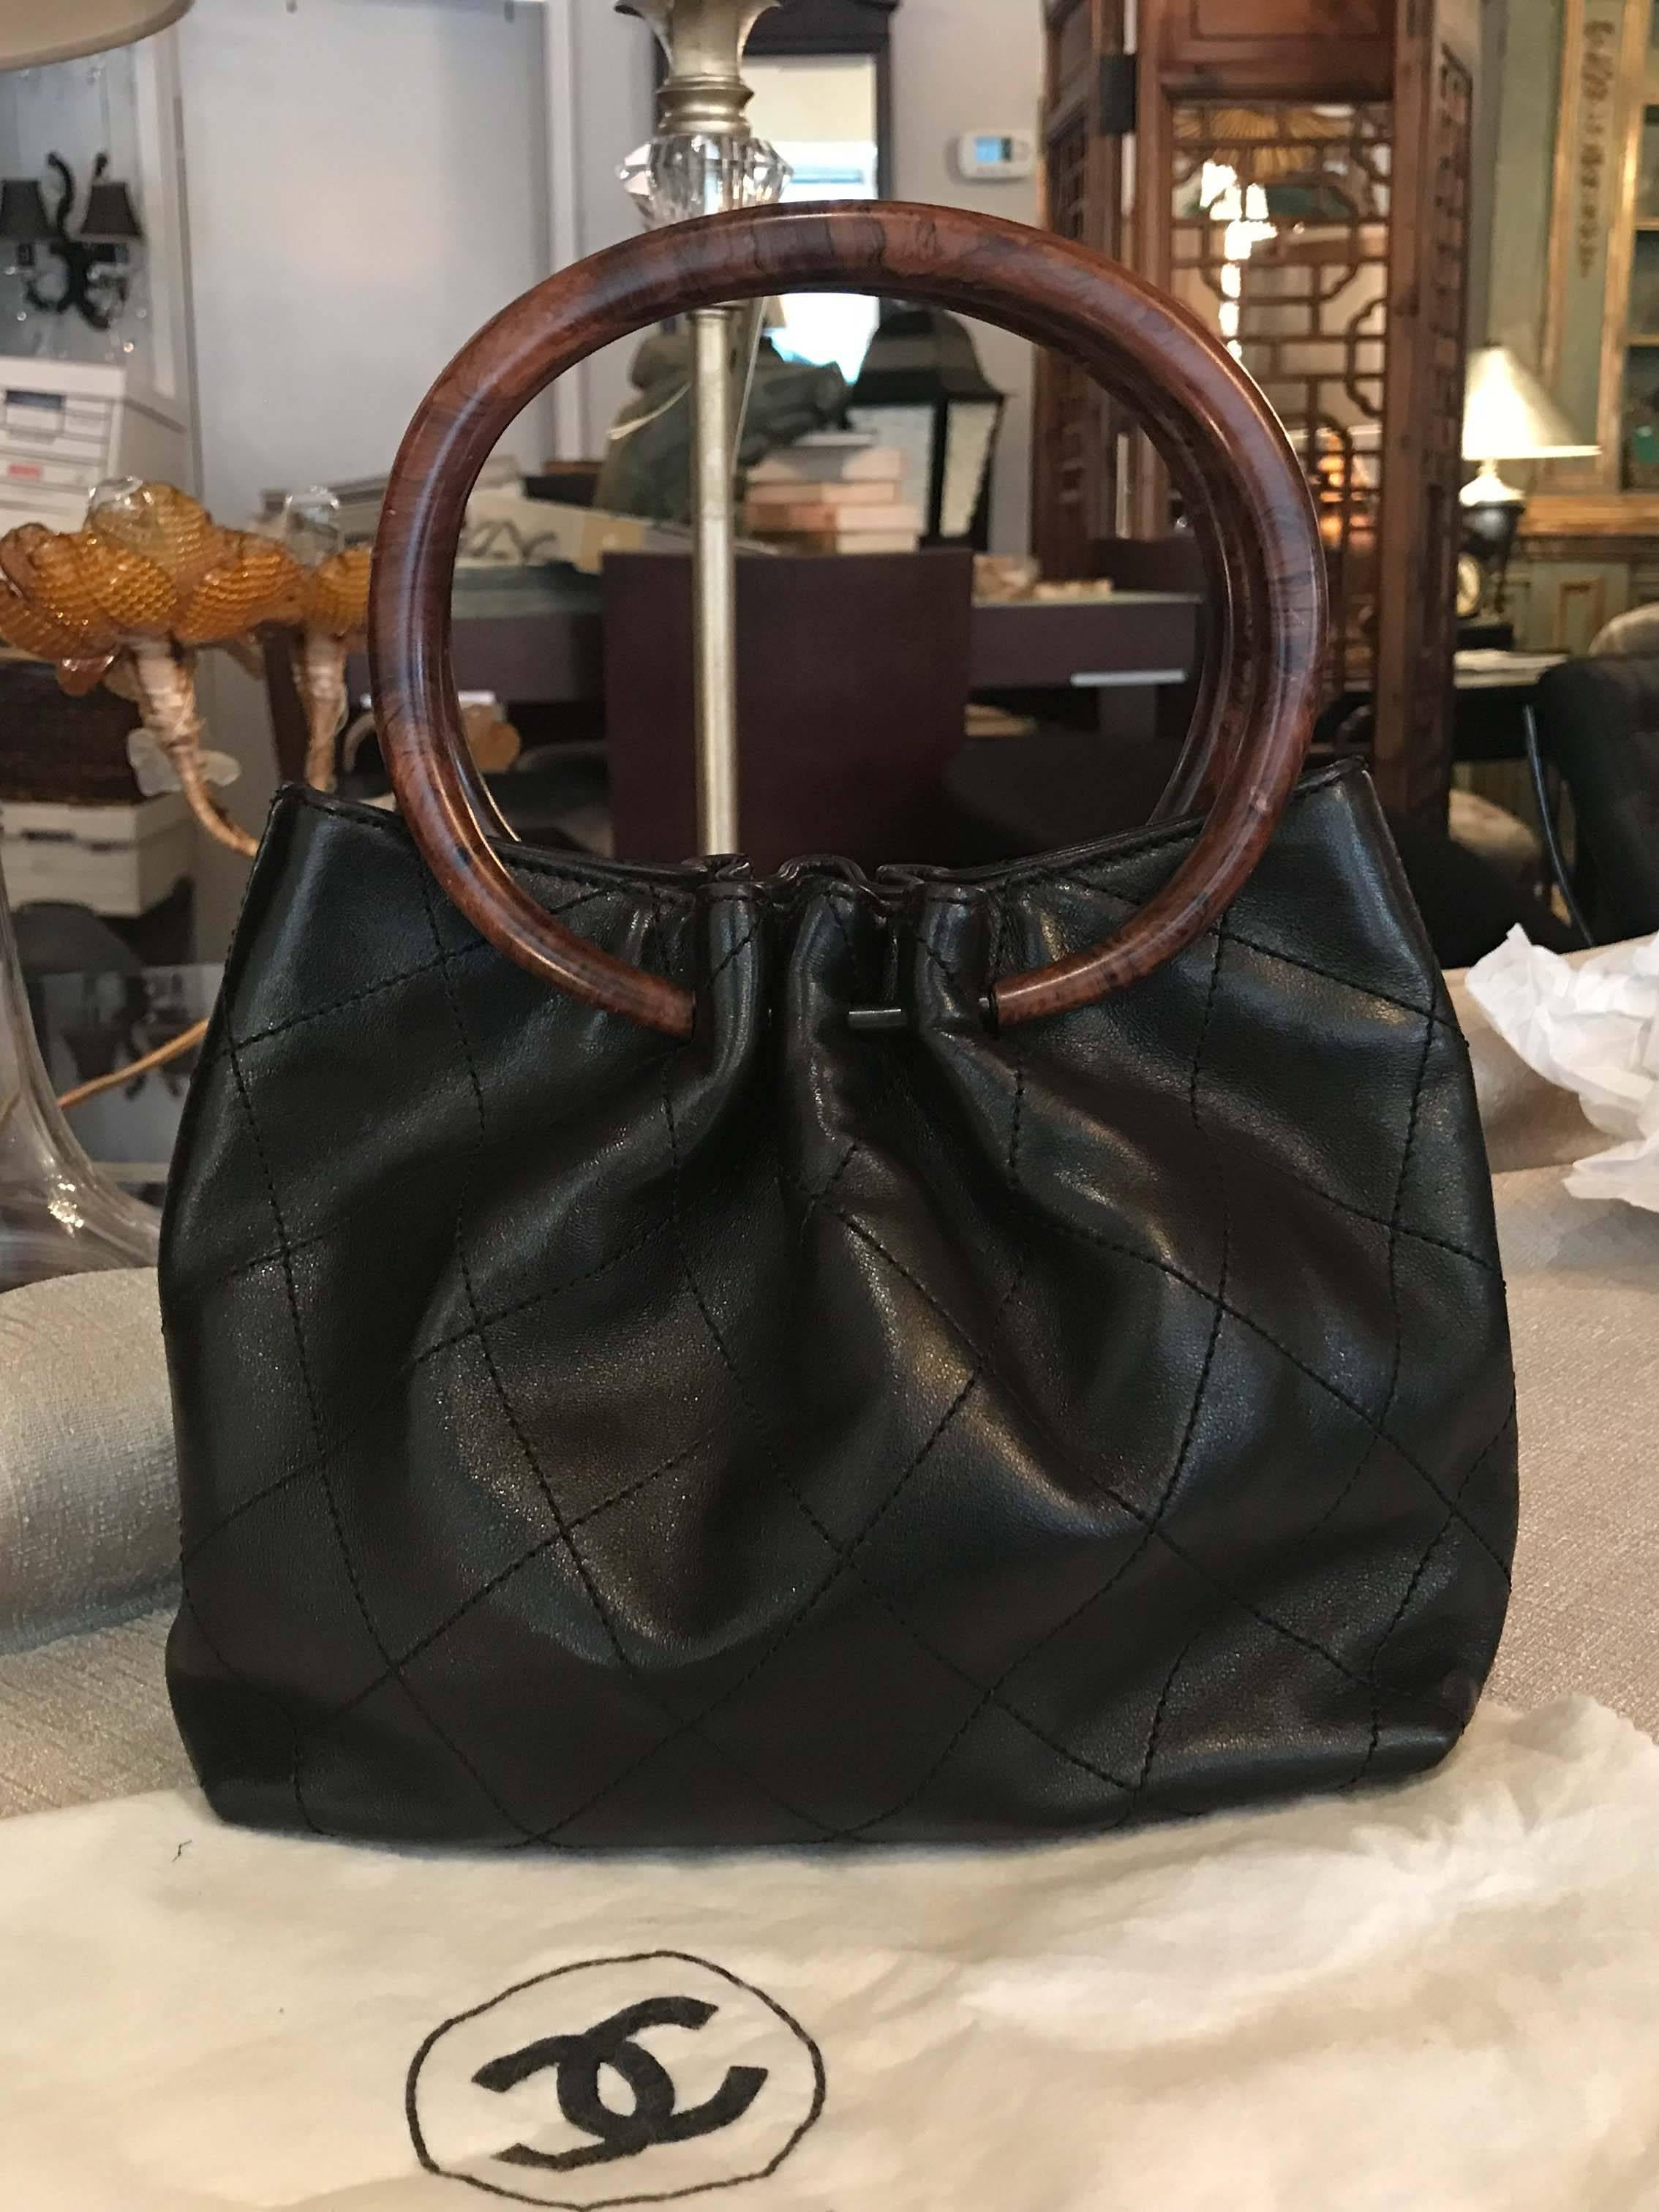 Black-brown quilted leather Chanel handle bag with gold-tone hardware, Dual marbled resin handles, black lining, zippered pocket and serial number on interior wall, magnetic snap closures at top. Light wear consistent with age and occasional use.